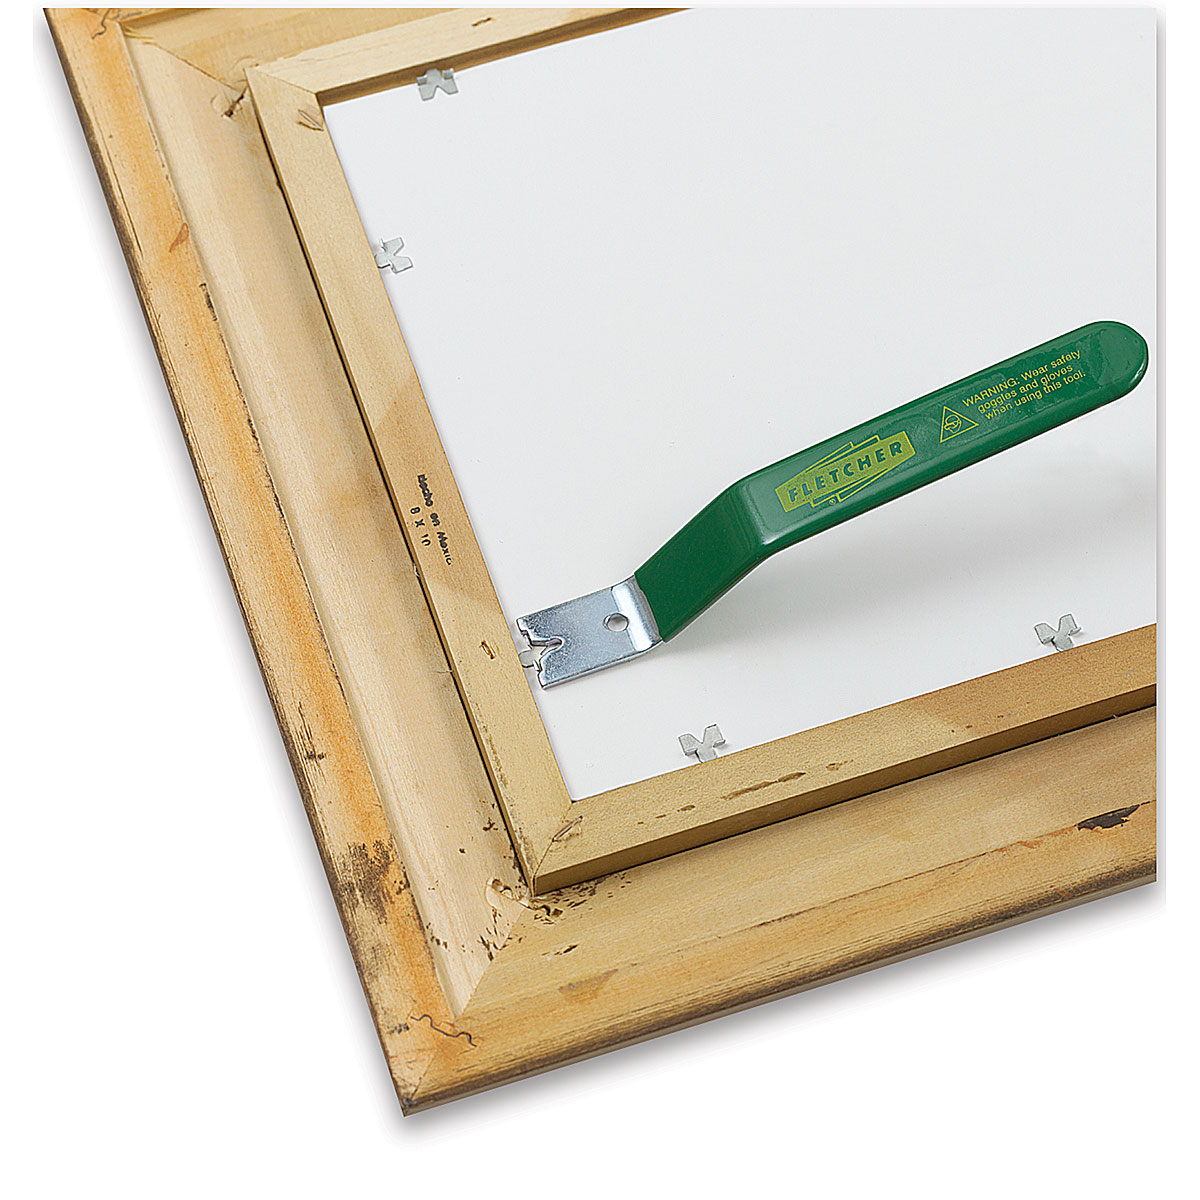 Tools for Securing the Contents of Picture Frames